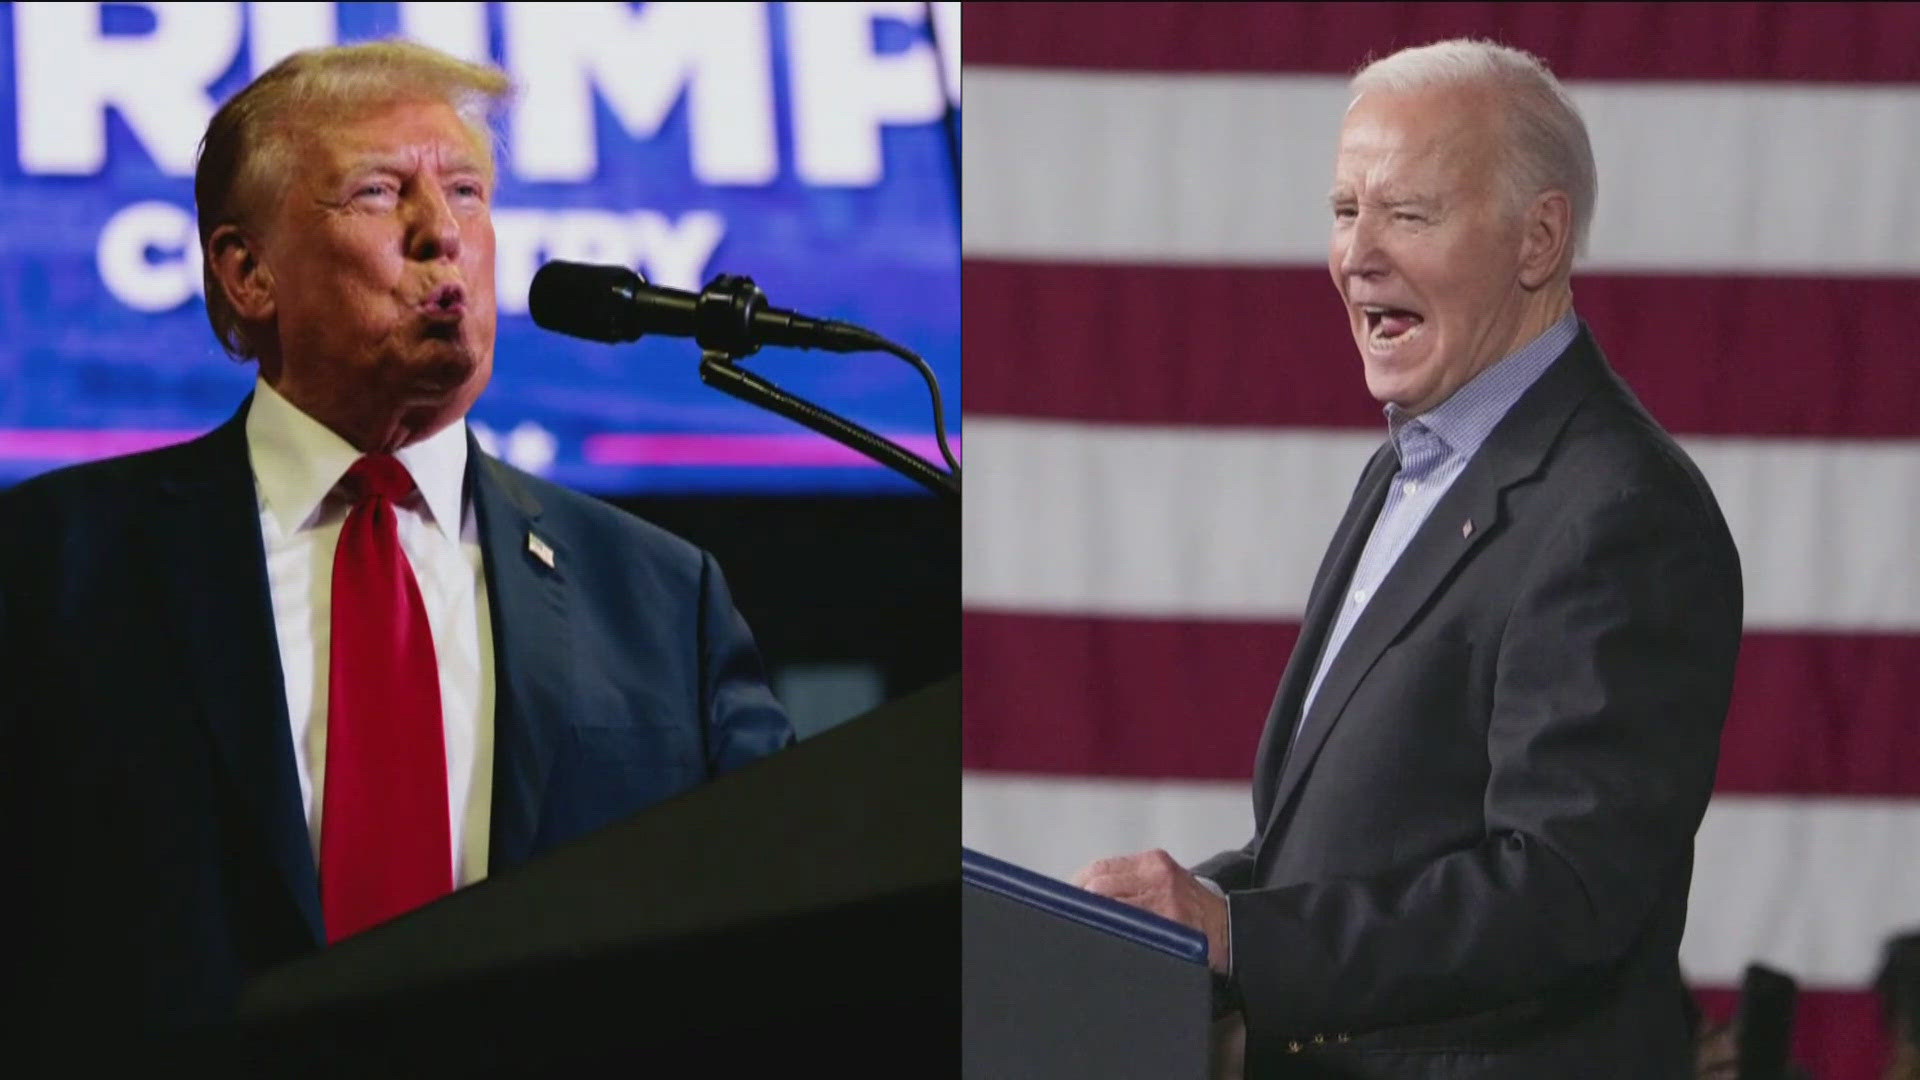 President Joe Biden and former President Donald Trump will go face-to-face on the stage in Atlanta, Ga., but the format will be different than previous debates.